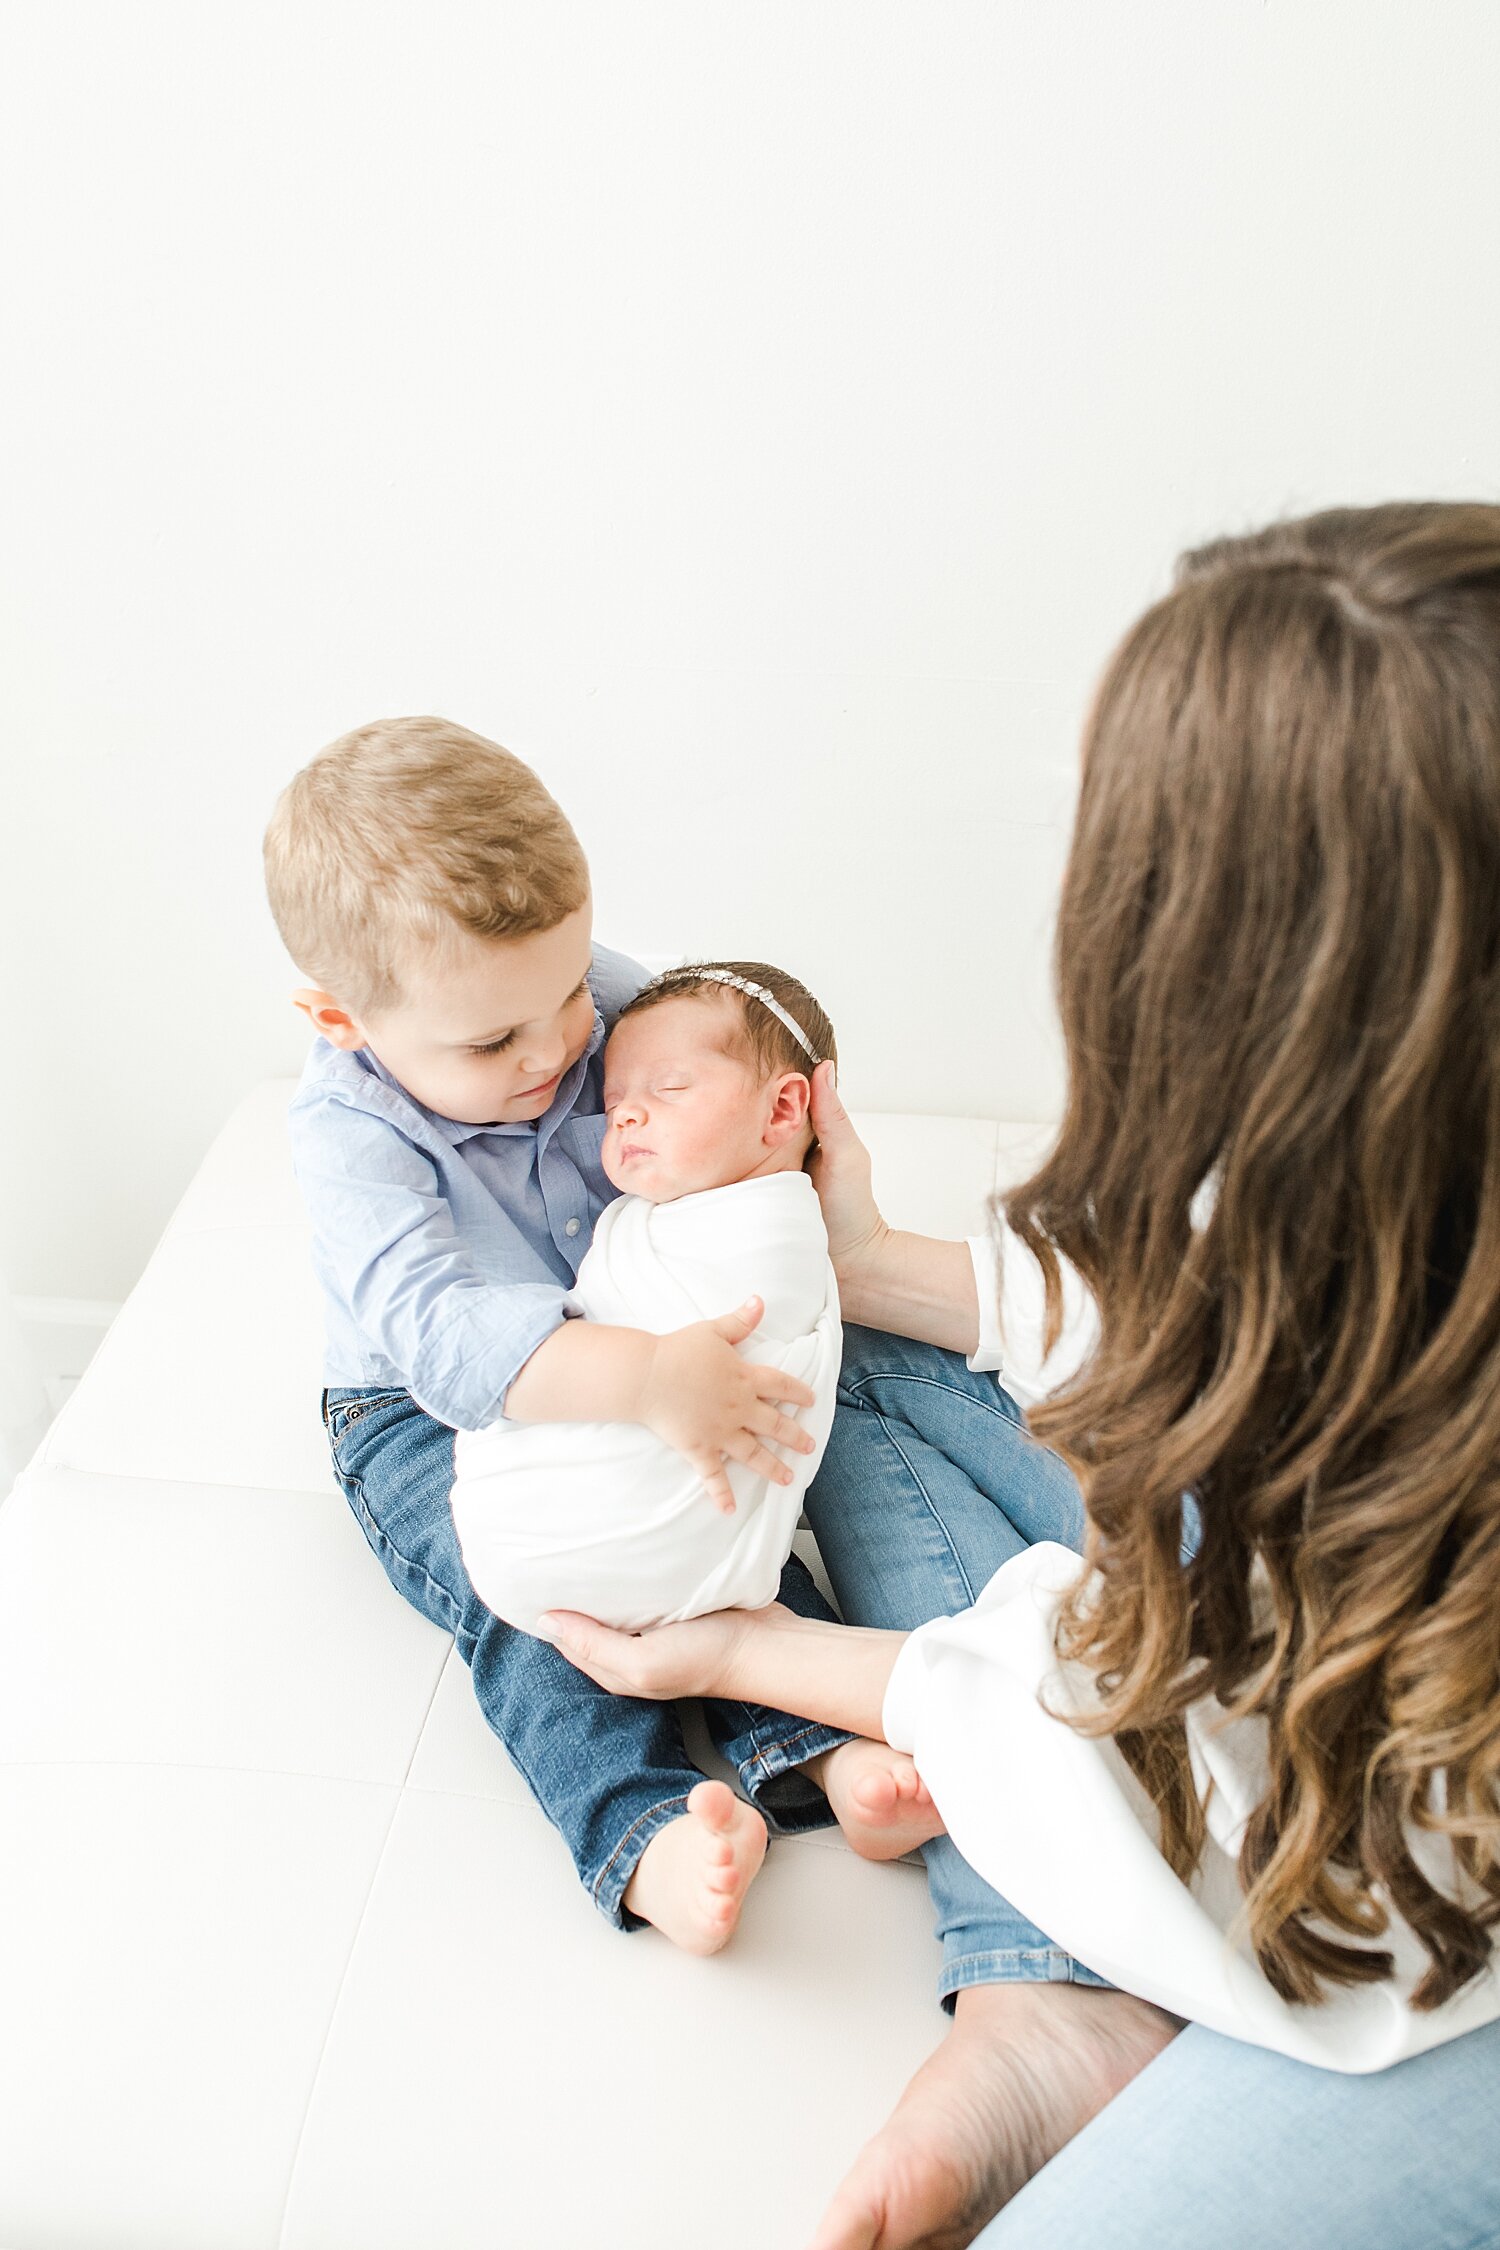 Mom helping big brother hold his baby sister during newborn session. Photos by Kristin Wood Photography.